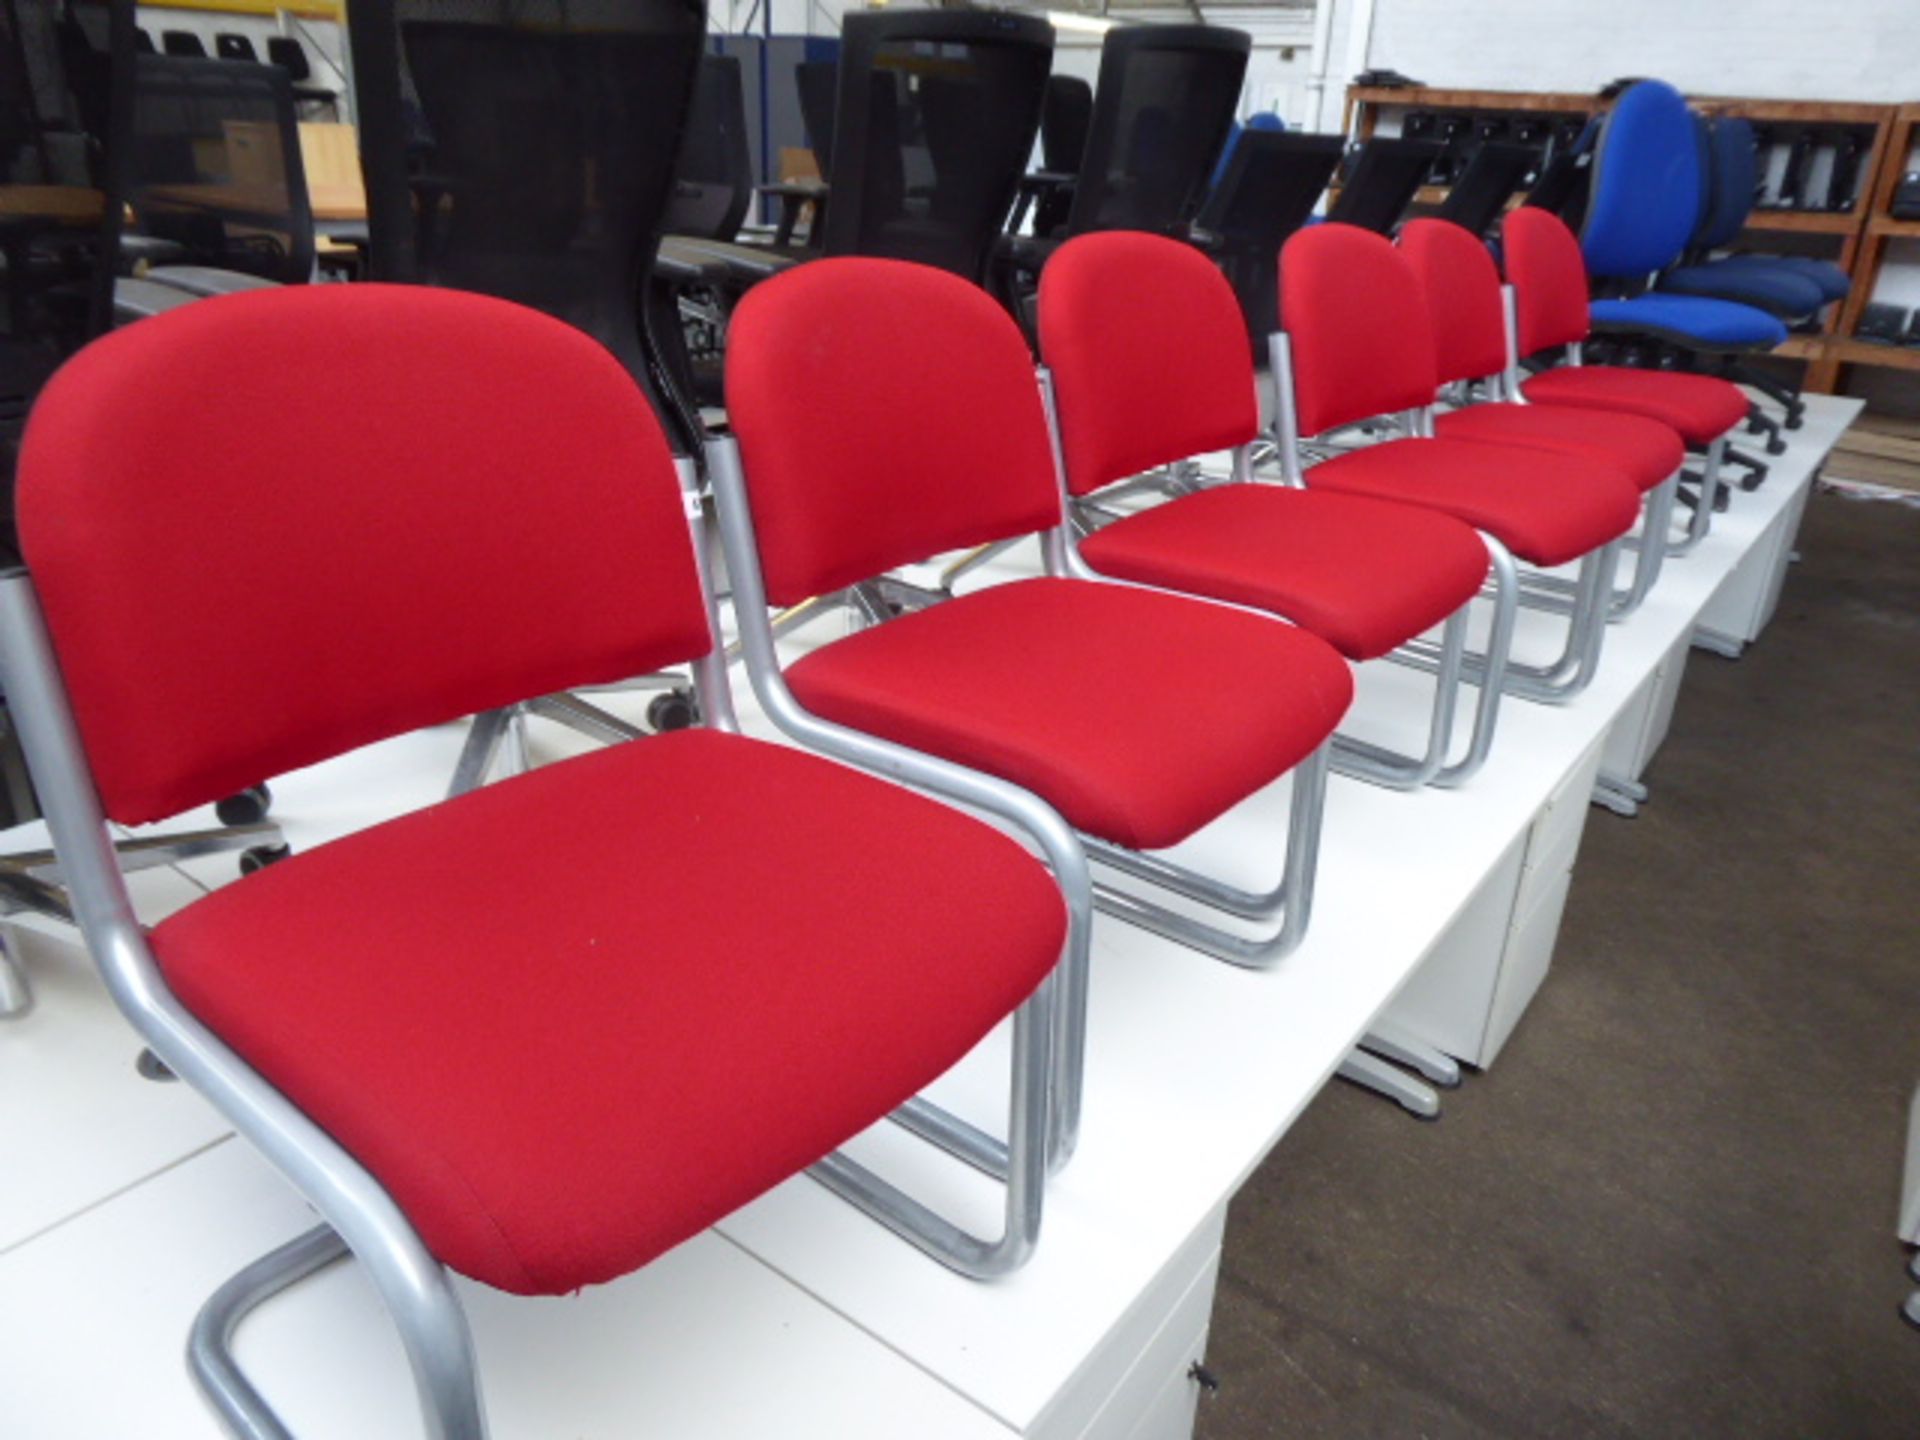 6 Red cloth cantilever chairs